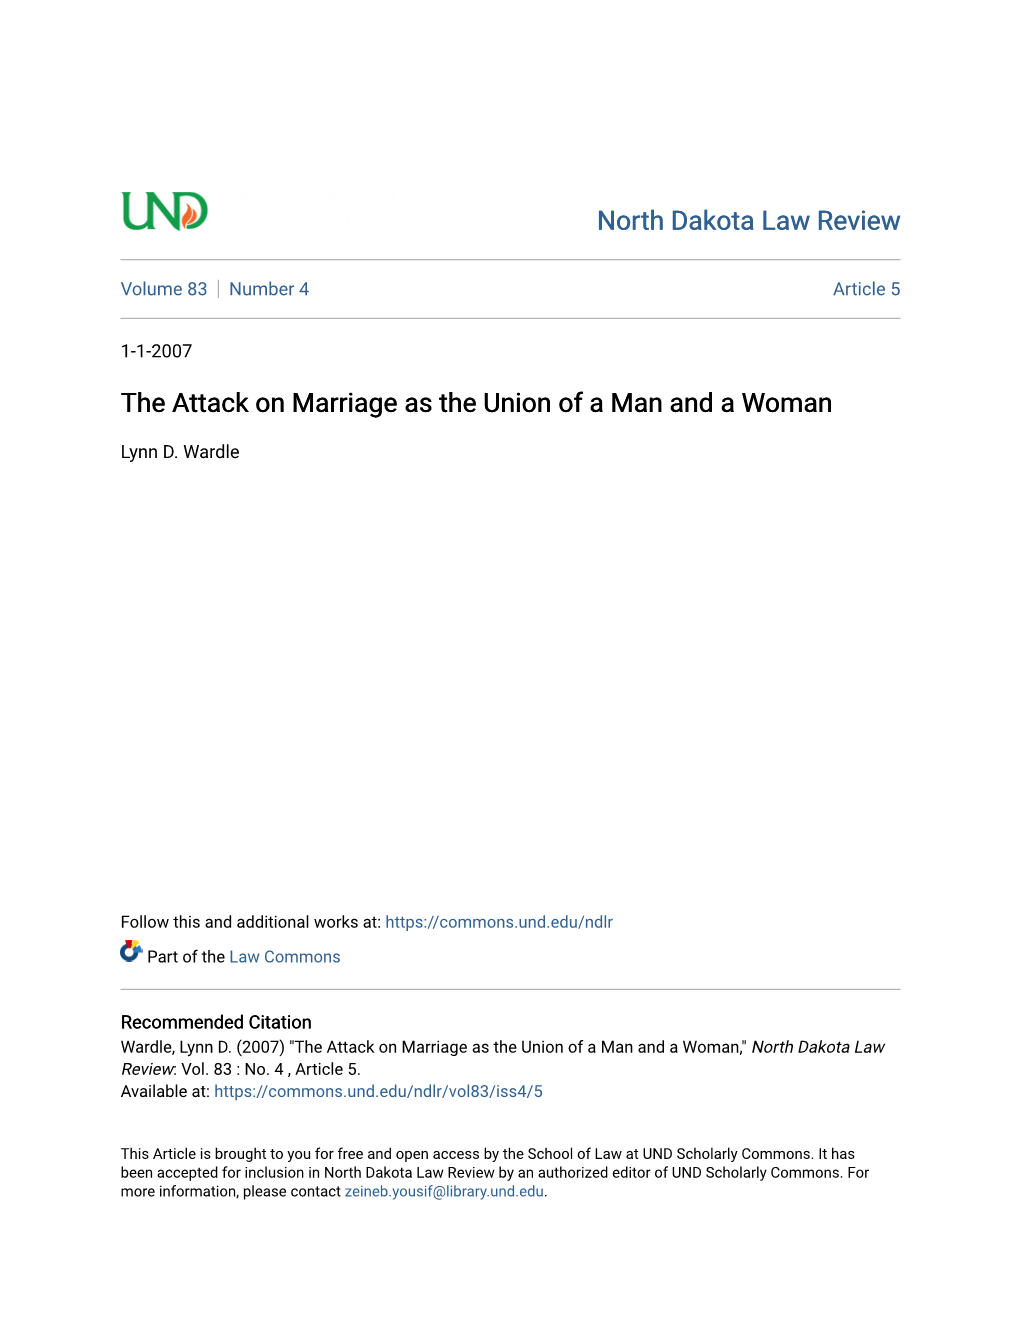 The Attack on Marriage As the Union of a Man and a Woman